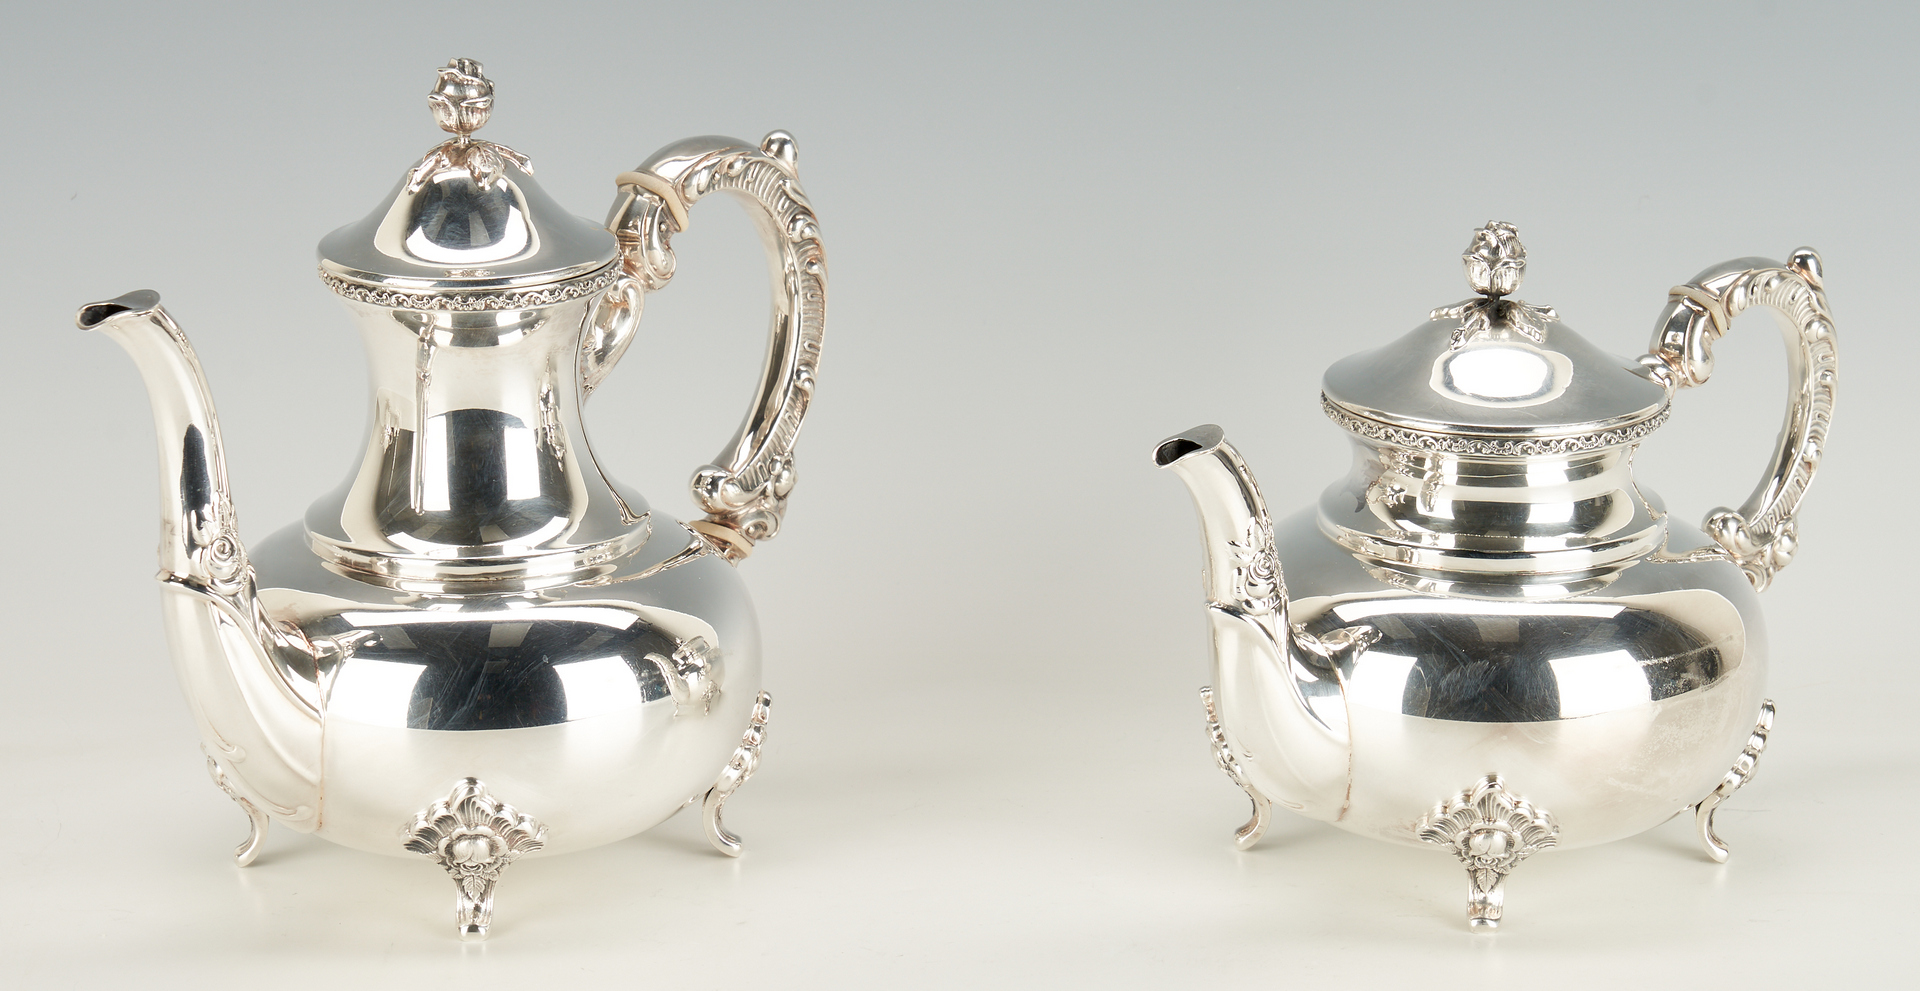 Lot 35: Emil Hermann Sterling Silver Tea Set plus shakers, fork, and tray